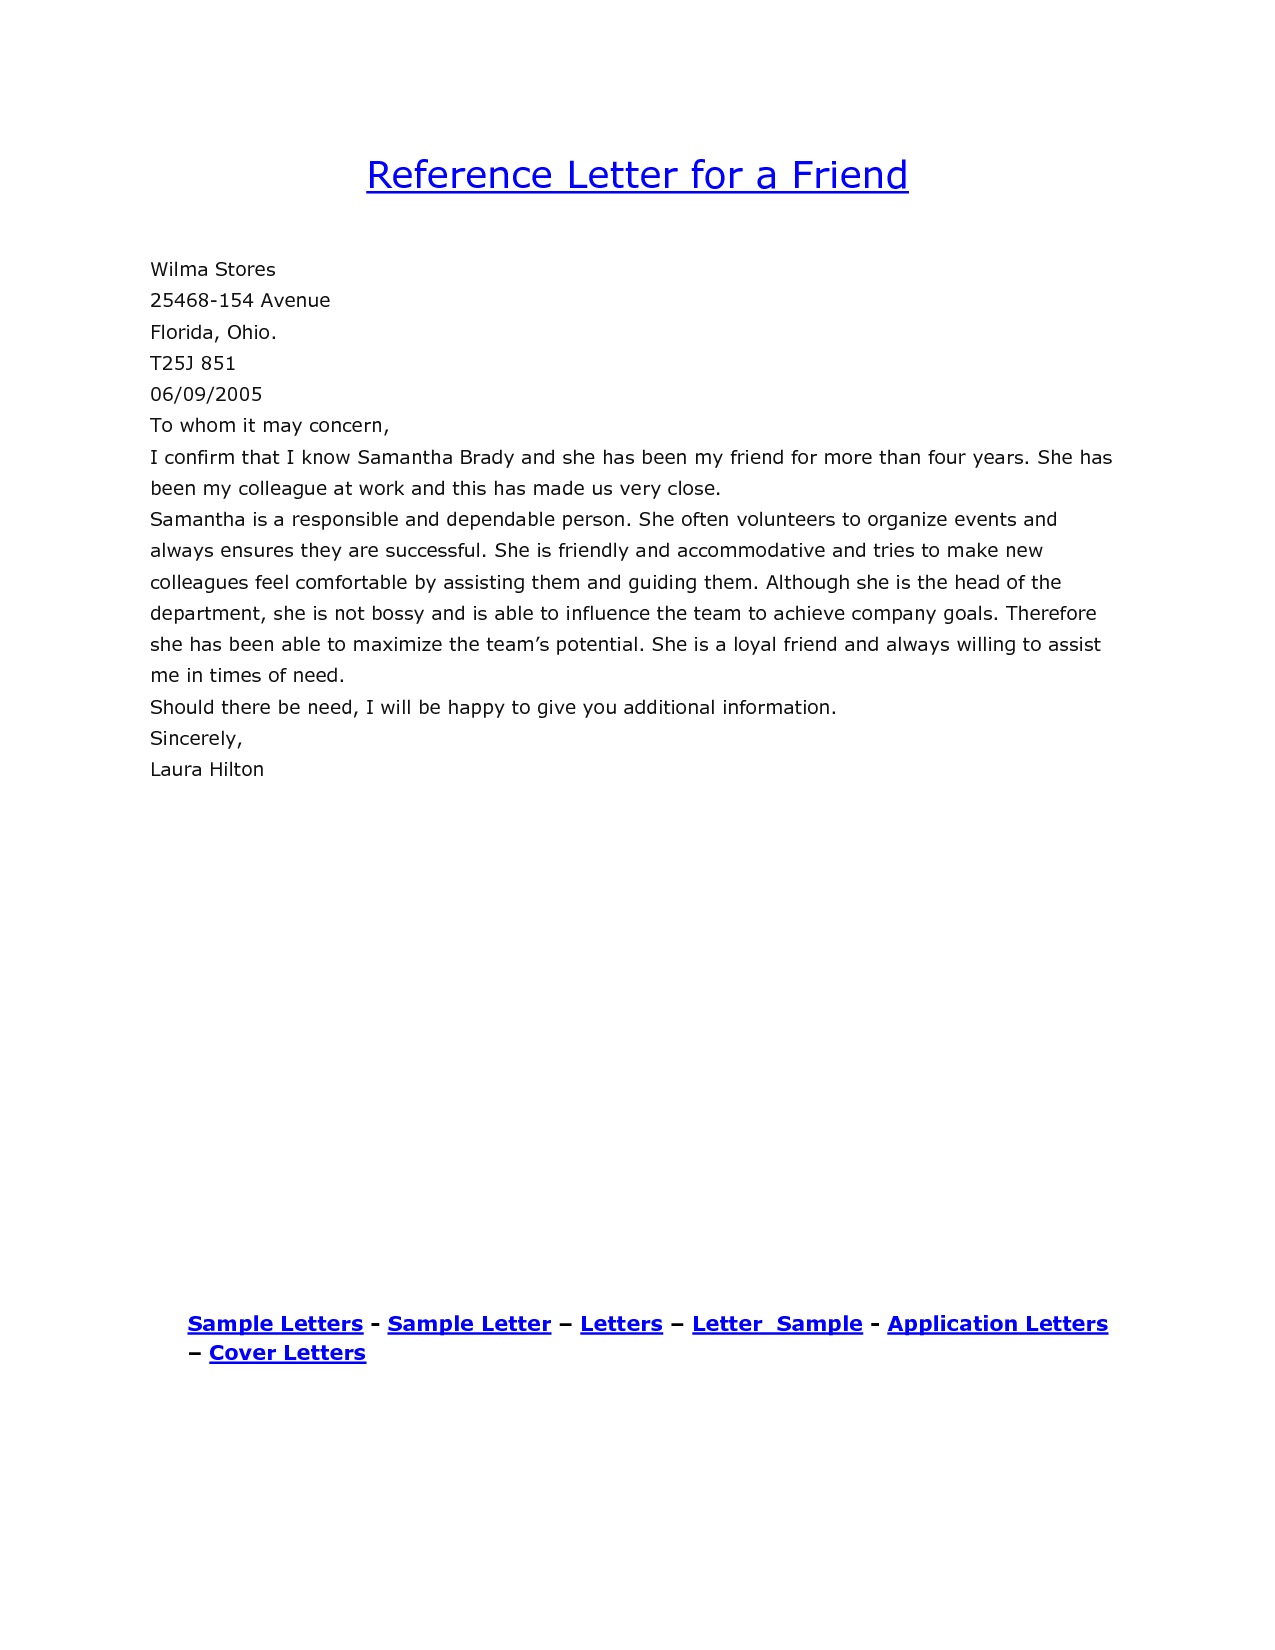 Reference Letter Sample For A Friend Yahoo Search Results in proportions 1275 X 1650